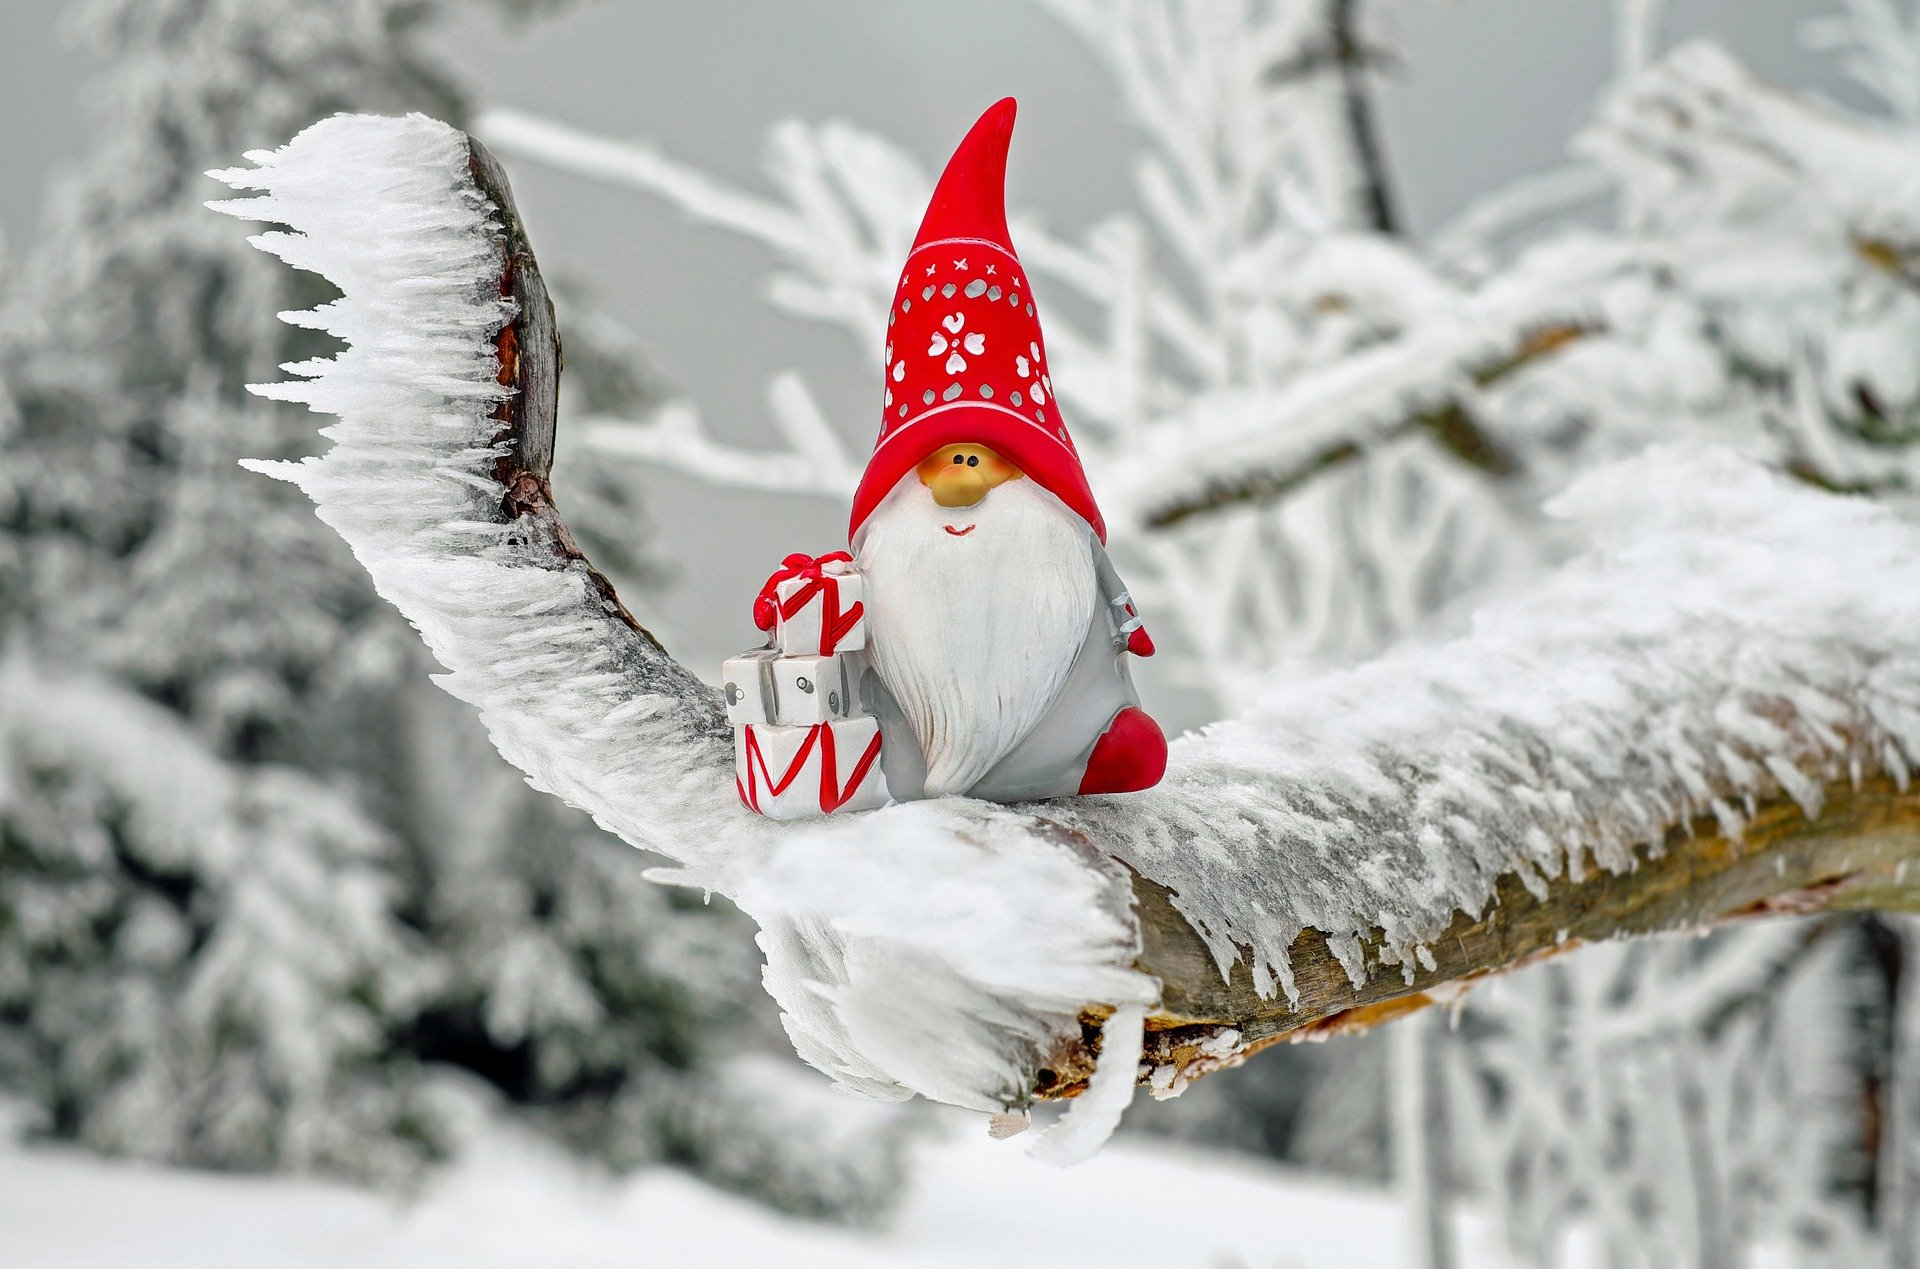 A North Pole elf with gifts sitting on a snow-covered tree branch.